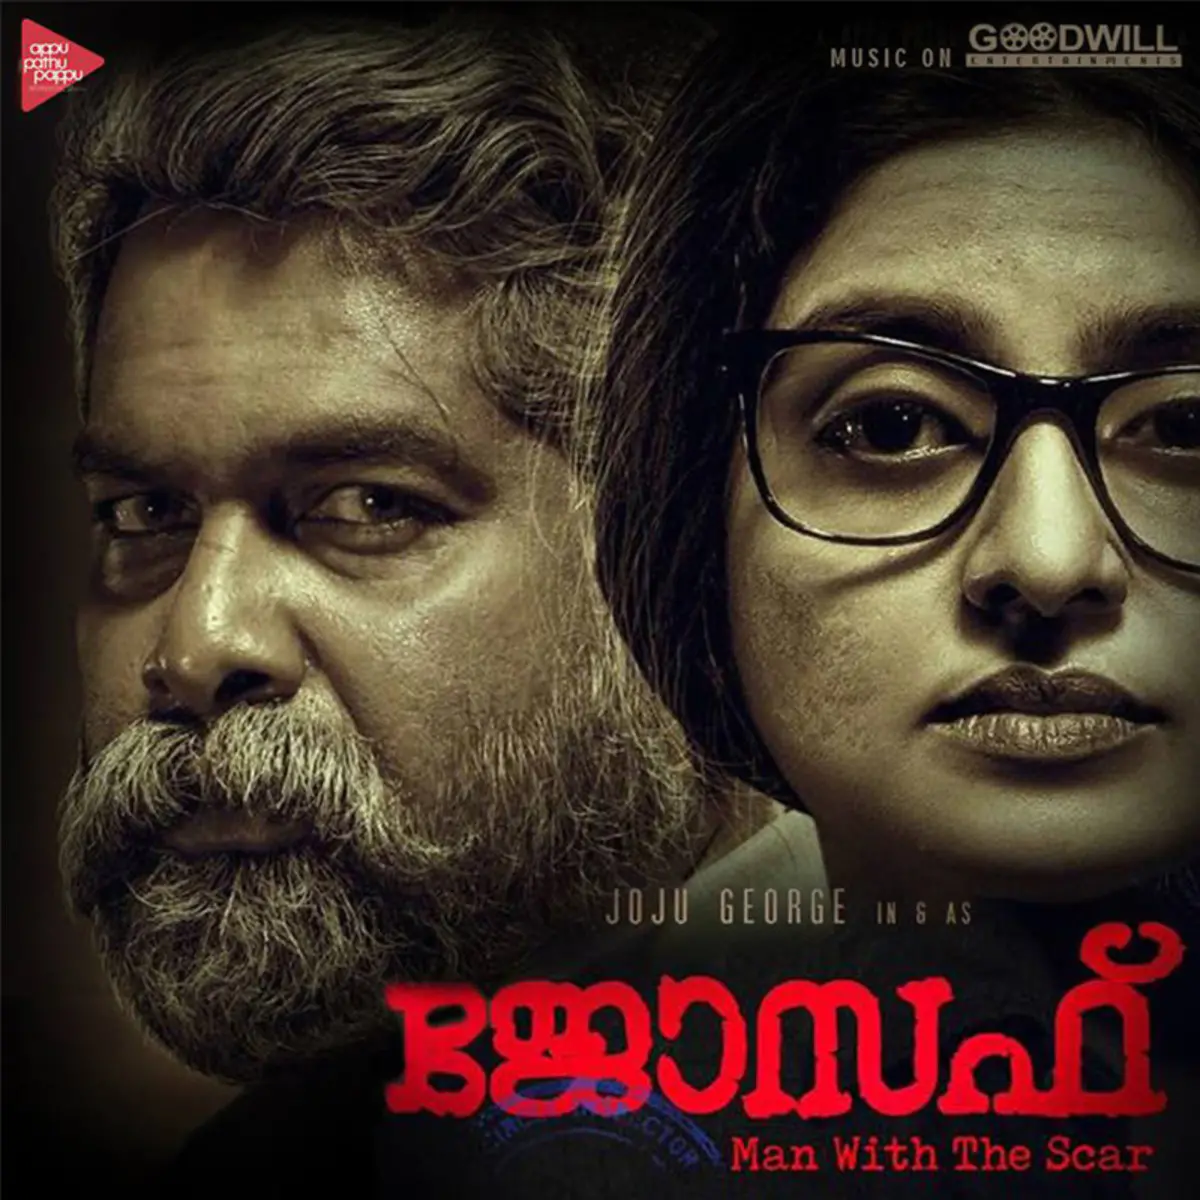 Joseph Songs Download Joseph Mp3 Malayalam Songs Online Free On Gaana Com ★ myfreemp3 helps download your favourite mp3 songs download fast, and easy. joseph songs download joseph mp3